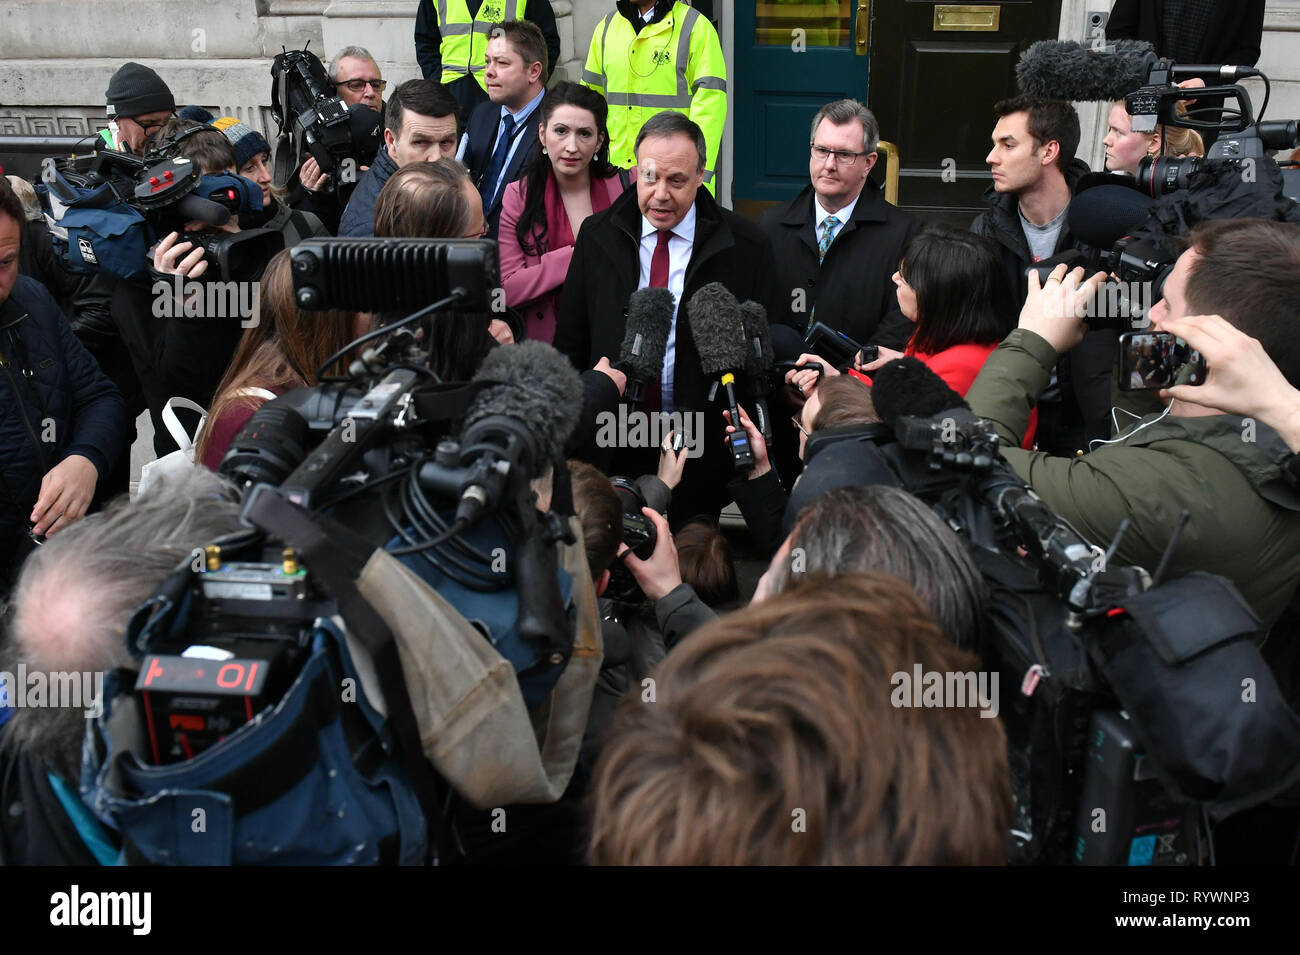 Nigel Dodds, deputy leader of the Democratic Unionist Party, with Emma Little Pengelly, and Jeffrey Donaldson outside the Cabinet Office in London's Whitehall, where the party is having 'ongoing and significant discussions with government' in the aftermath of this week's Brexit debates in the House of Commons. Stock Photo